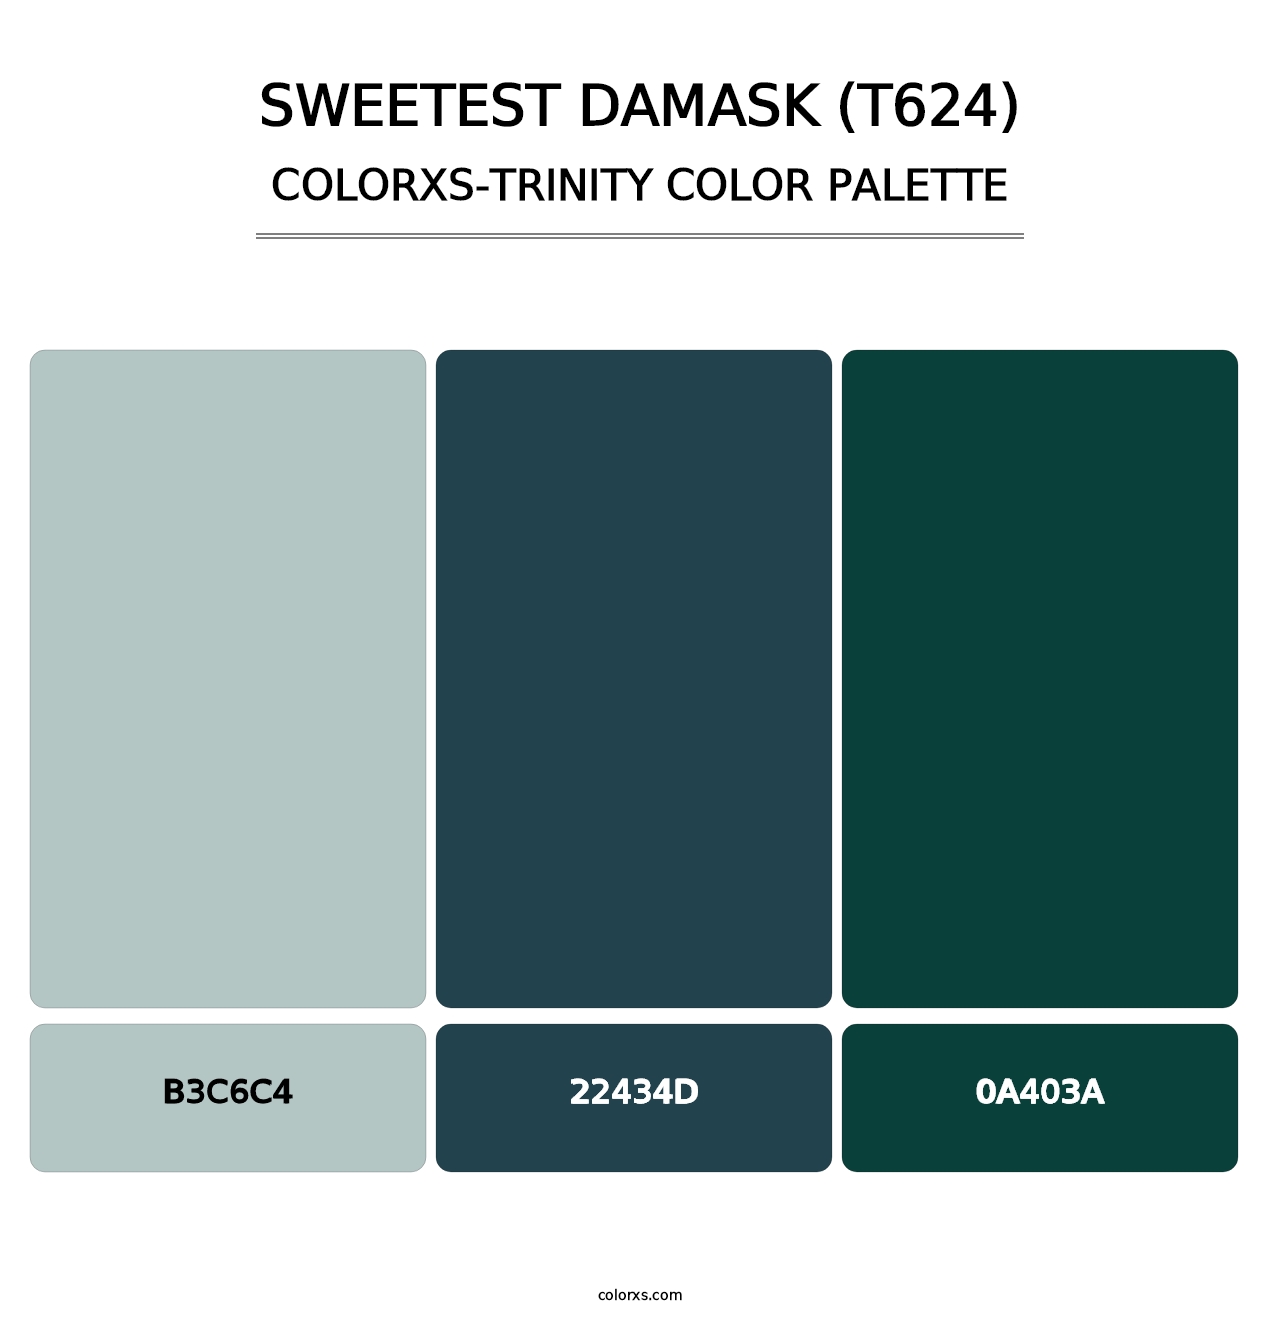 Sweetest Damask (T624) - Colorxs Trinity Palette